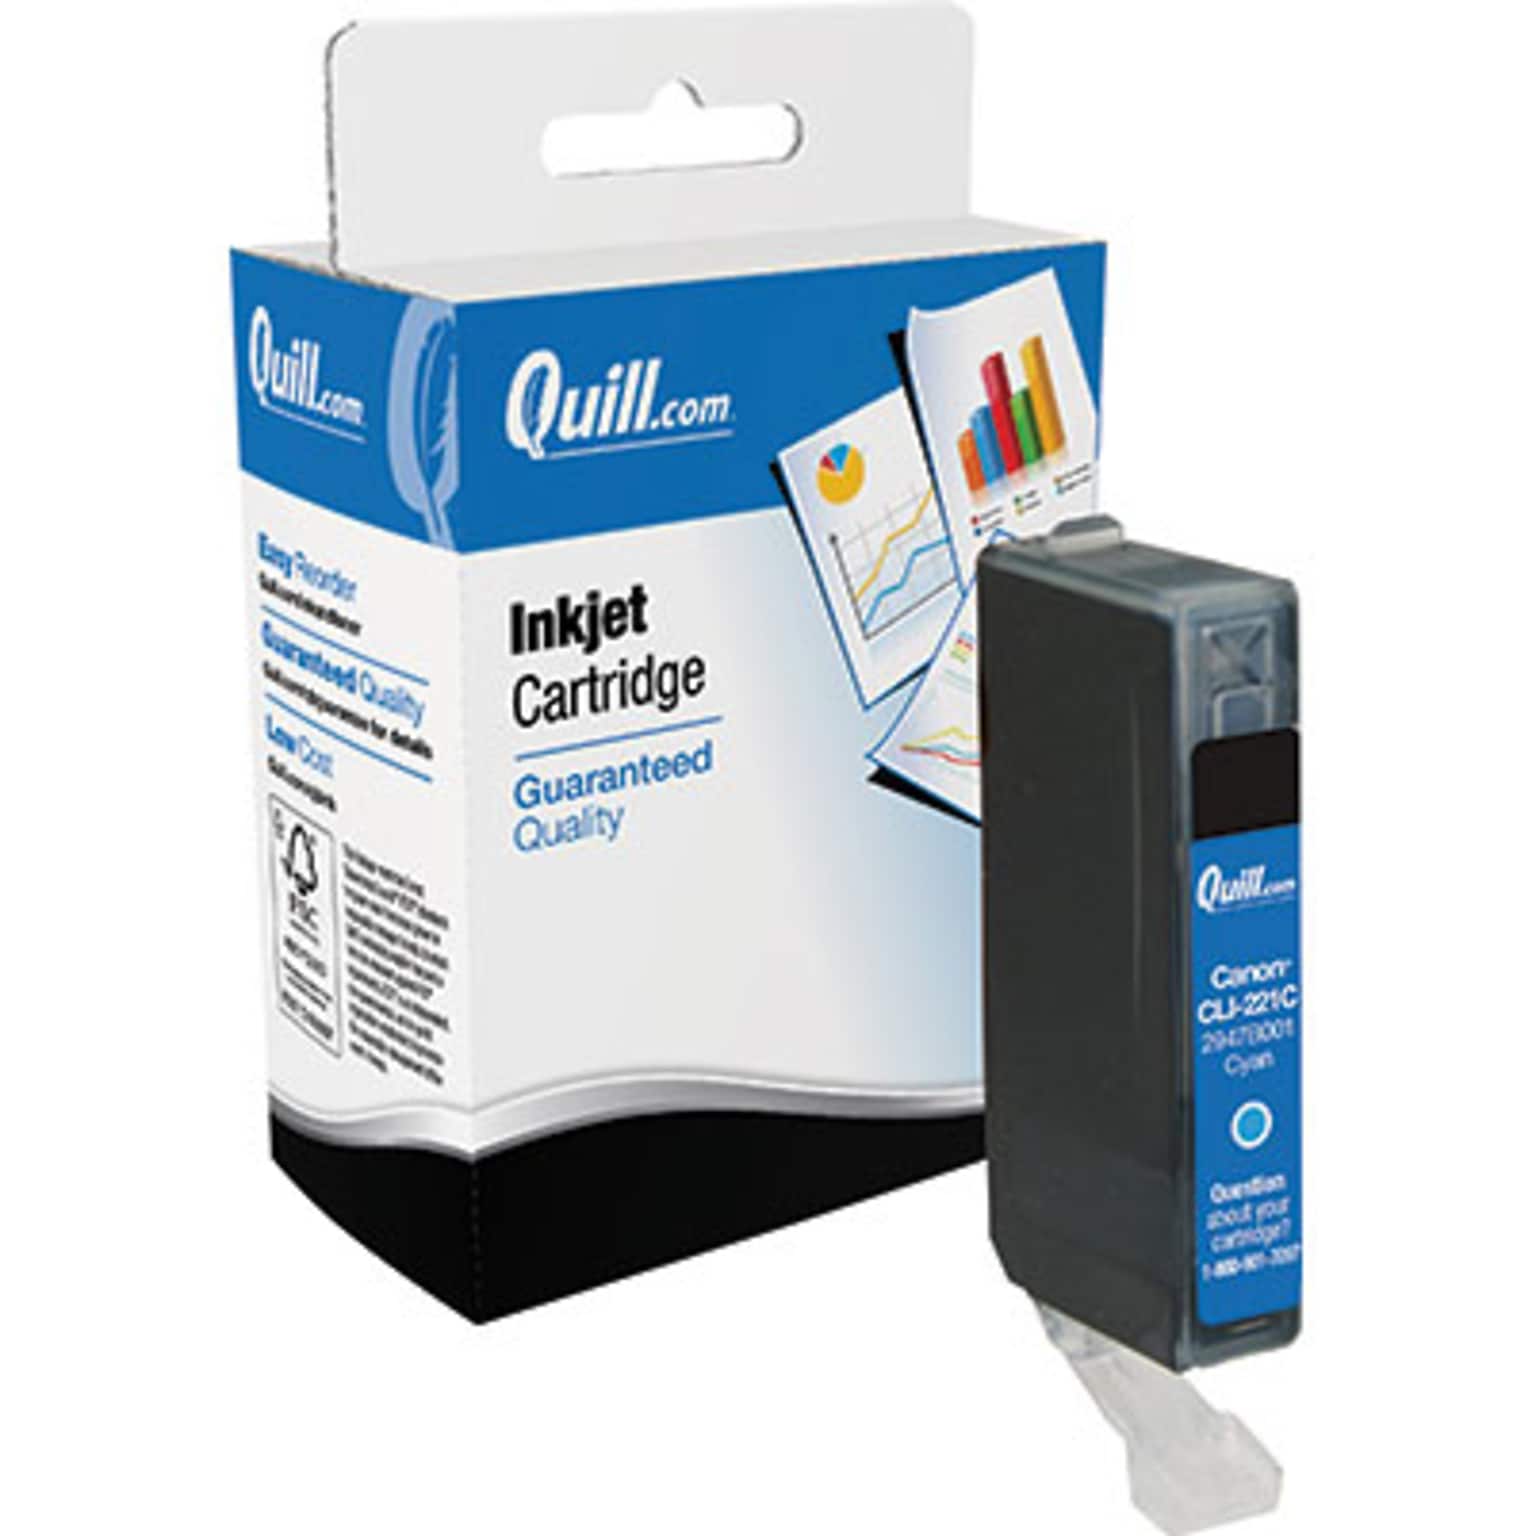 Quill Brand Remanufactured Ink Cartridge Comparable to Canon® CLI-221C Cyan (100% Satisfaction Guaranteed)